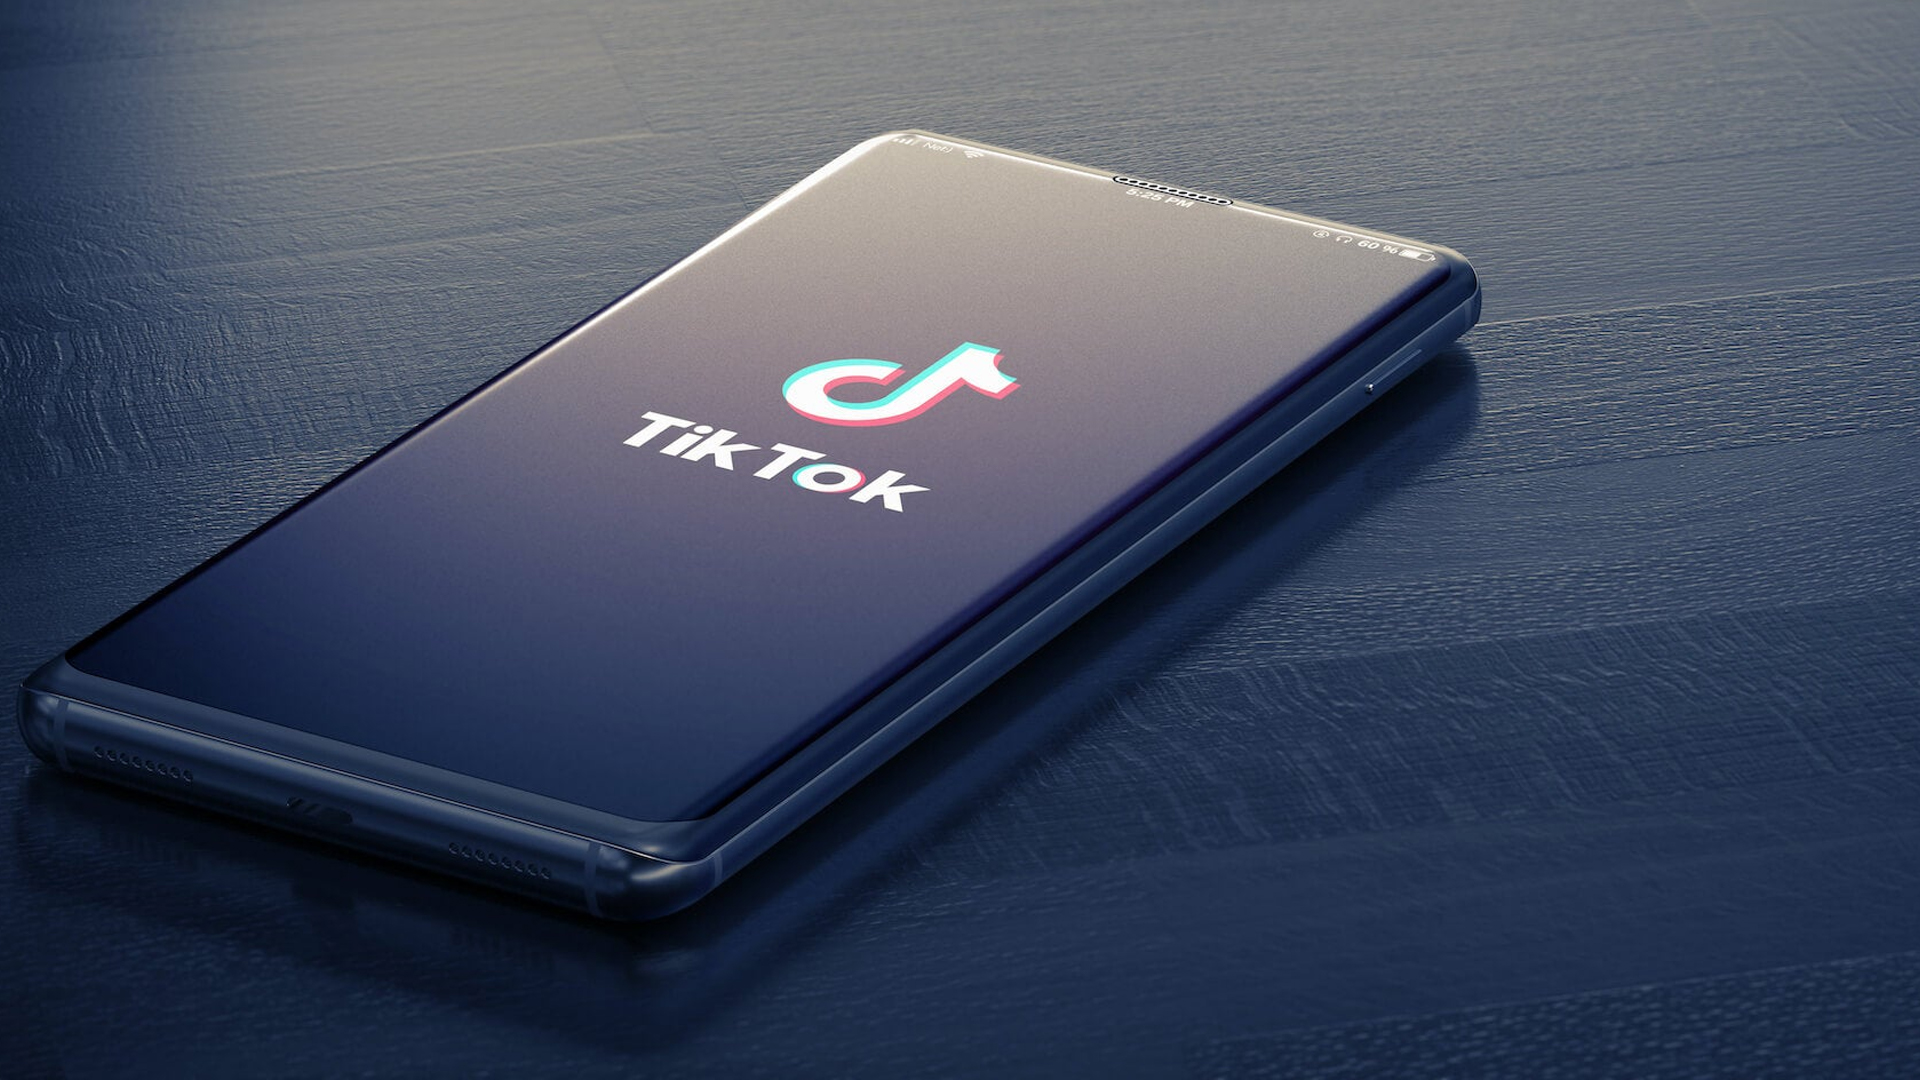 An iPhone with the Tick Tok app launching with the Tik Tok logo displayed as the loading screen.